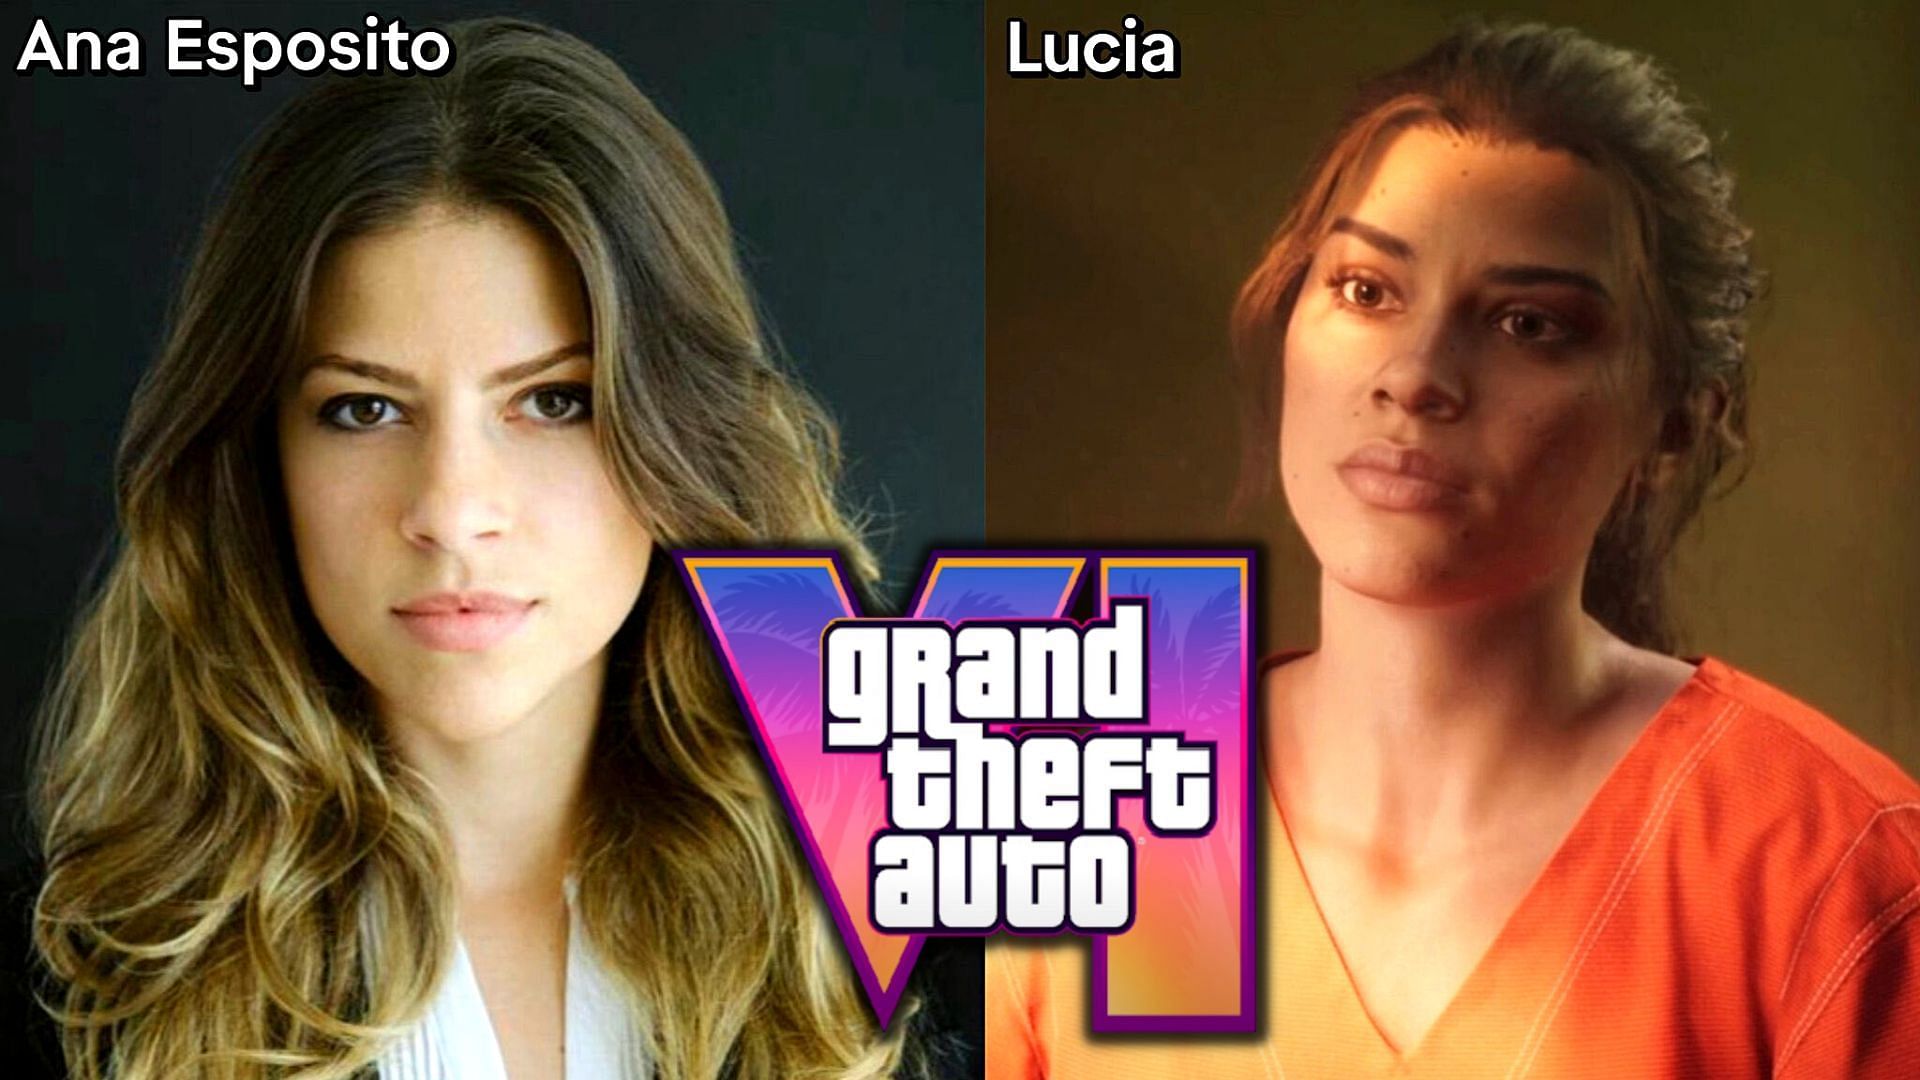 GTA 6 fans speculate actress Ana Esposito to be Lucia